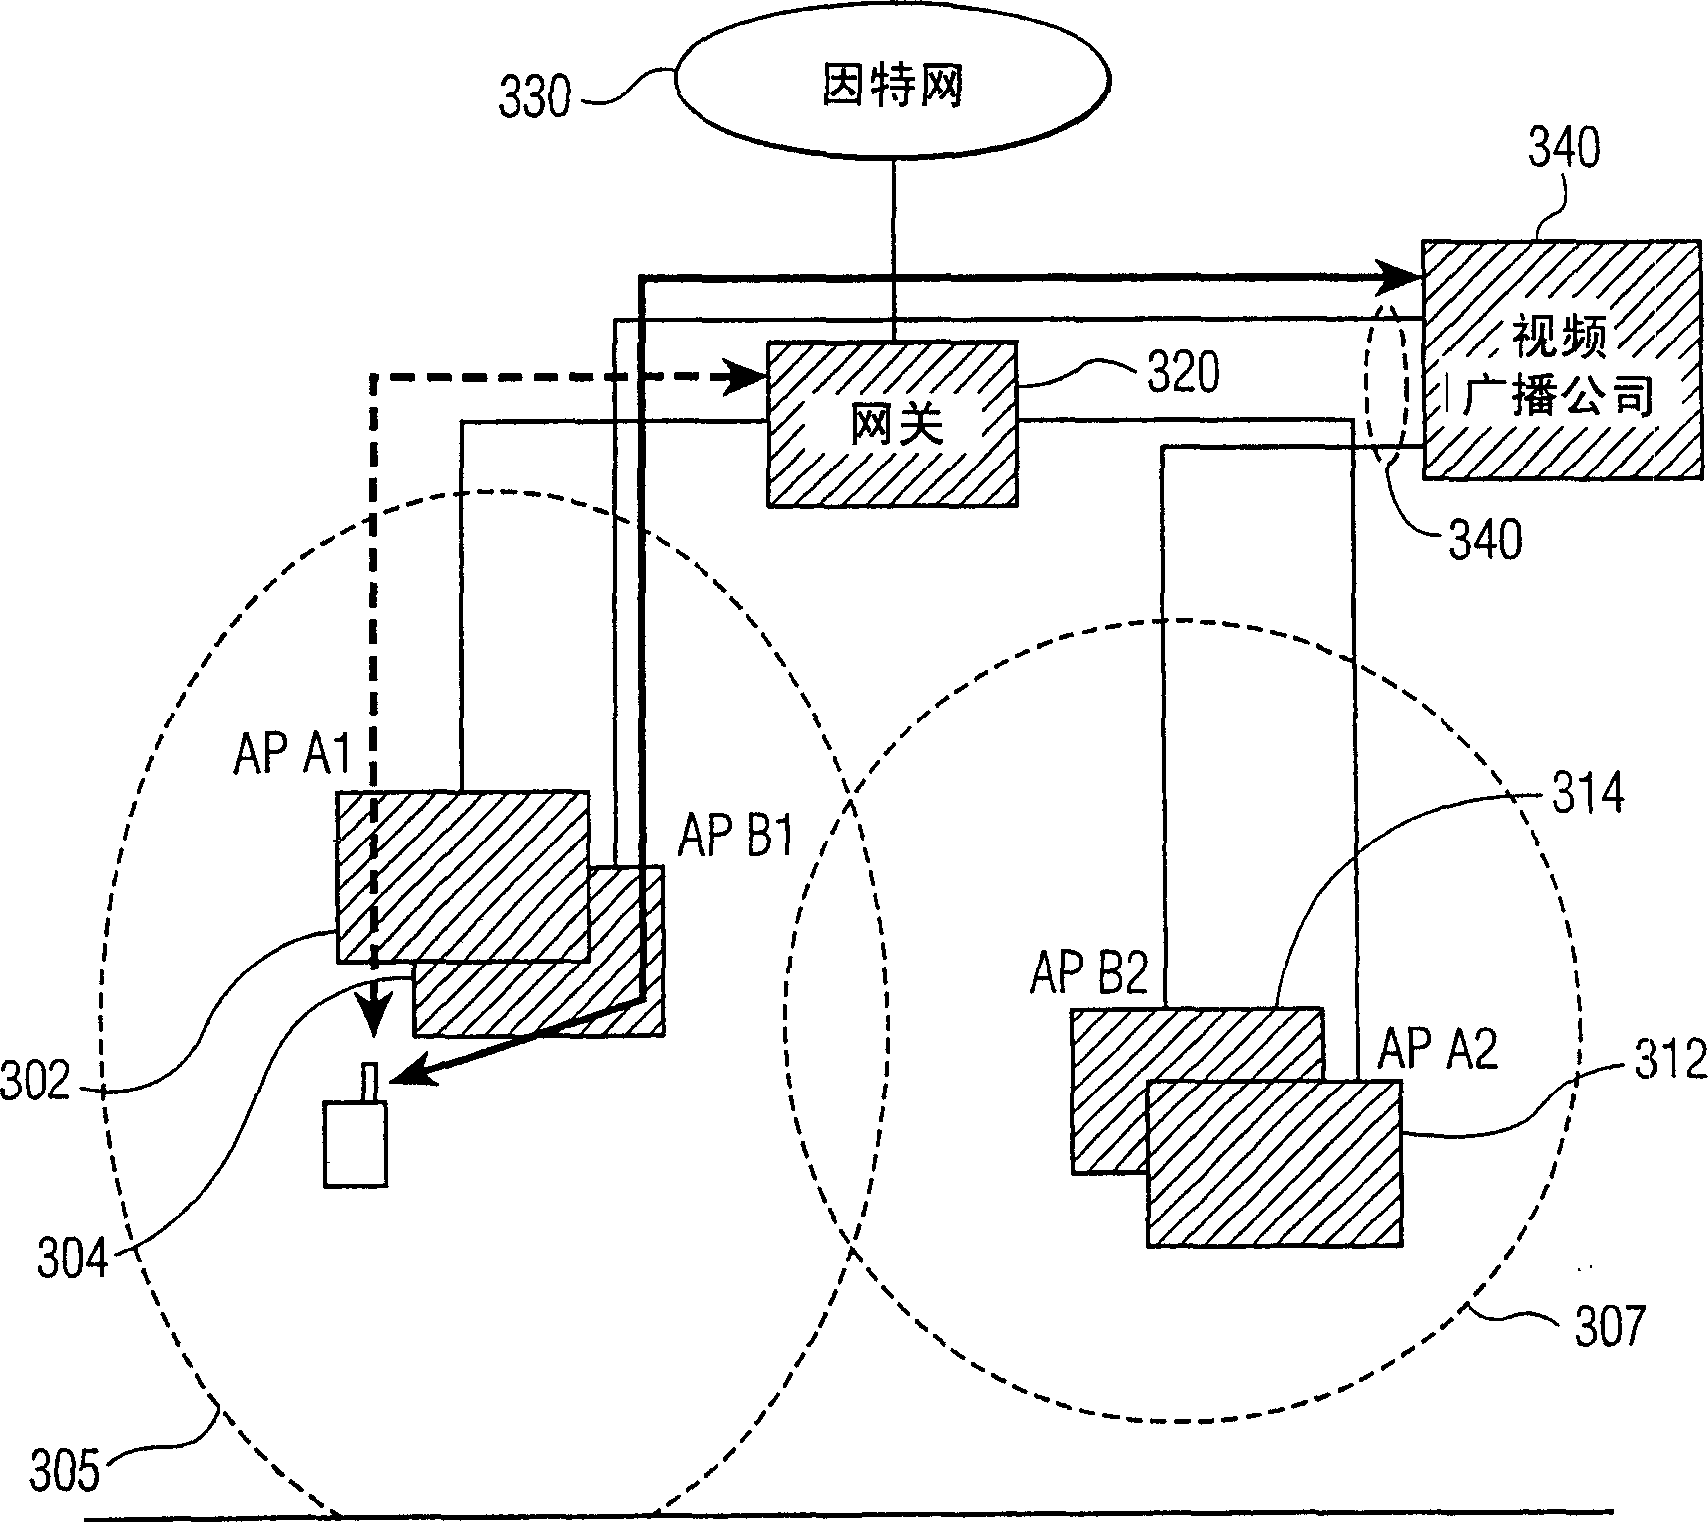 Method and apparatus for banding multiple access points